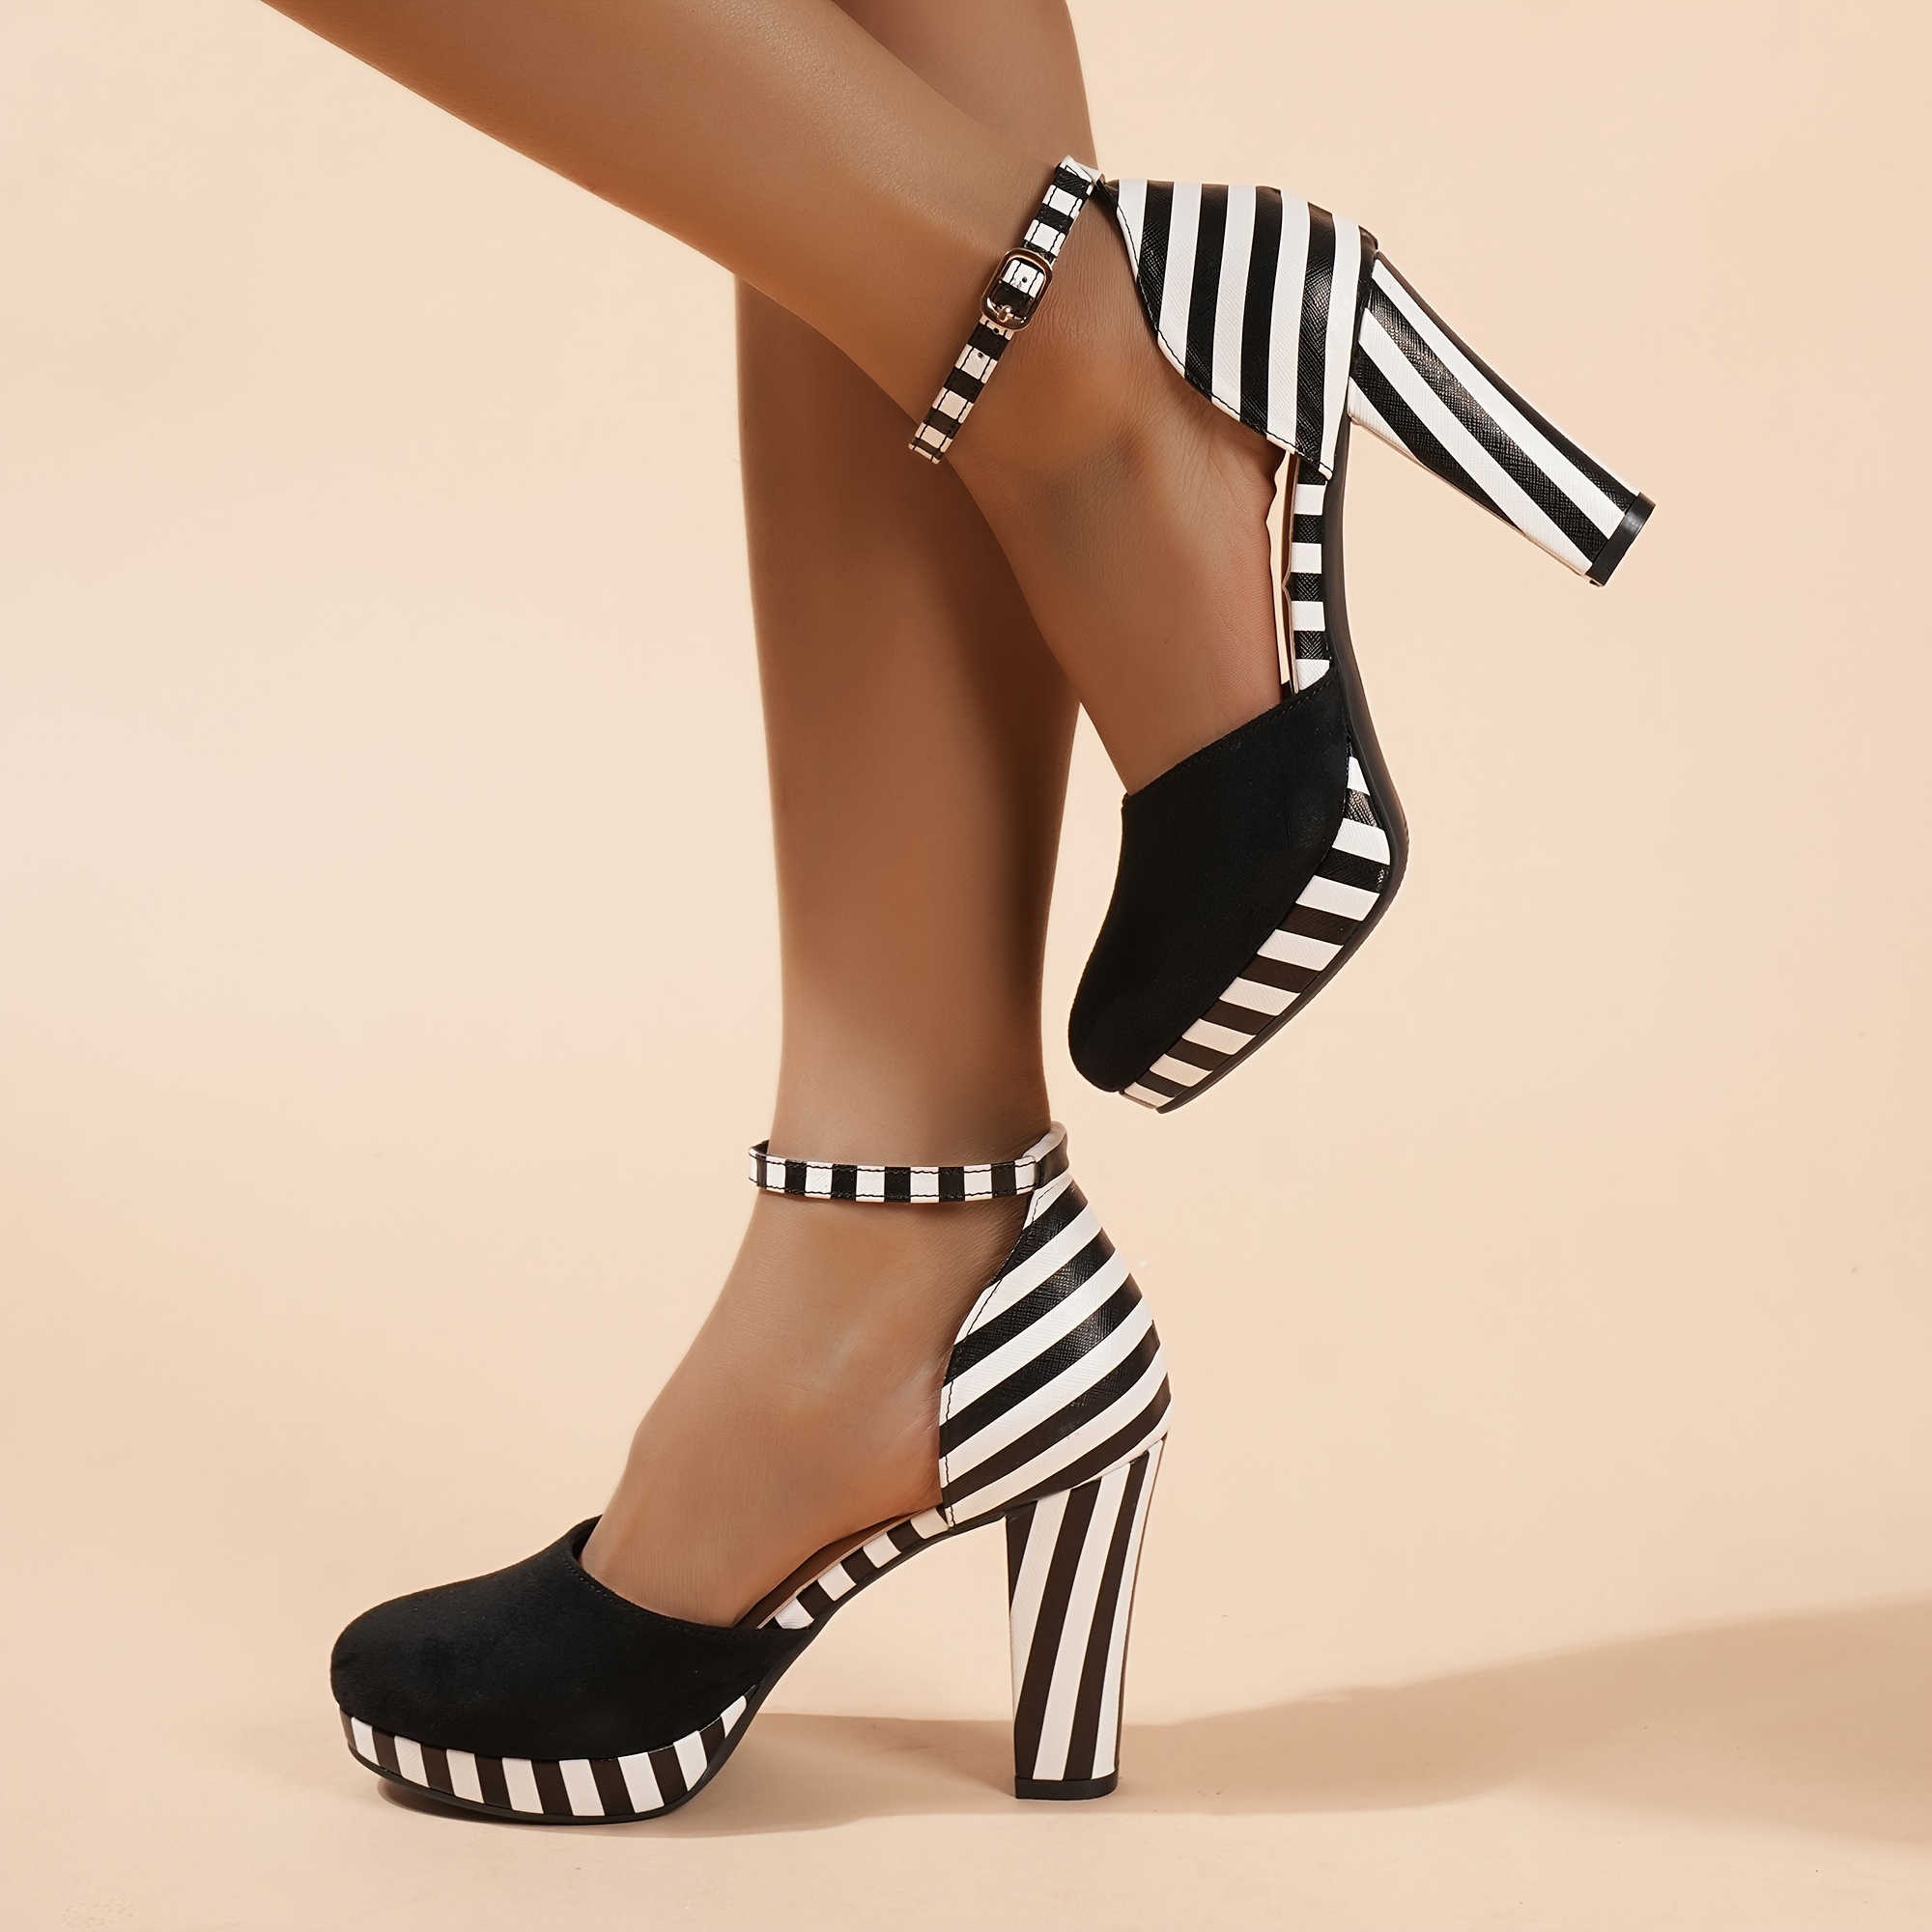 womens striped dorsay high heels fashion ankle strap platform sandals all match party dress shoes details 2